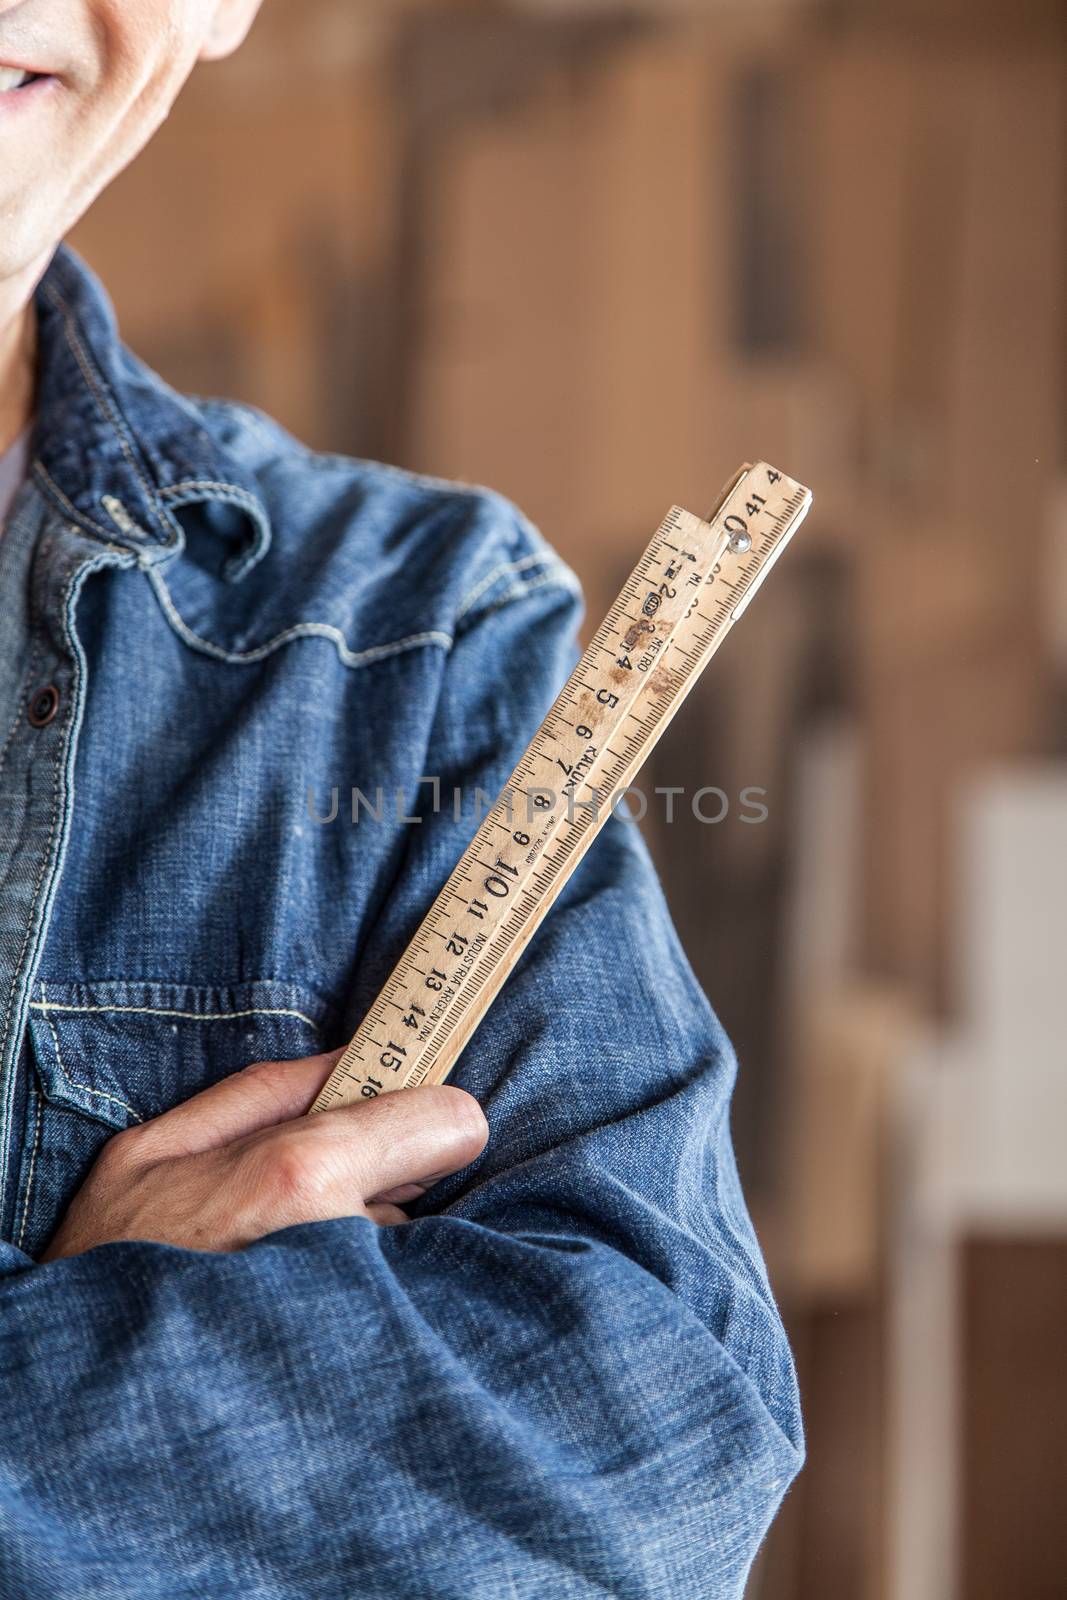 Carpenter holding a ruler by ifilms